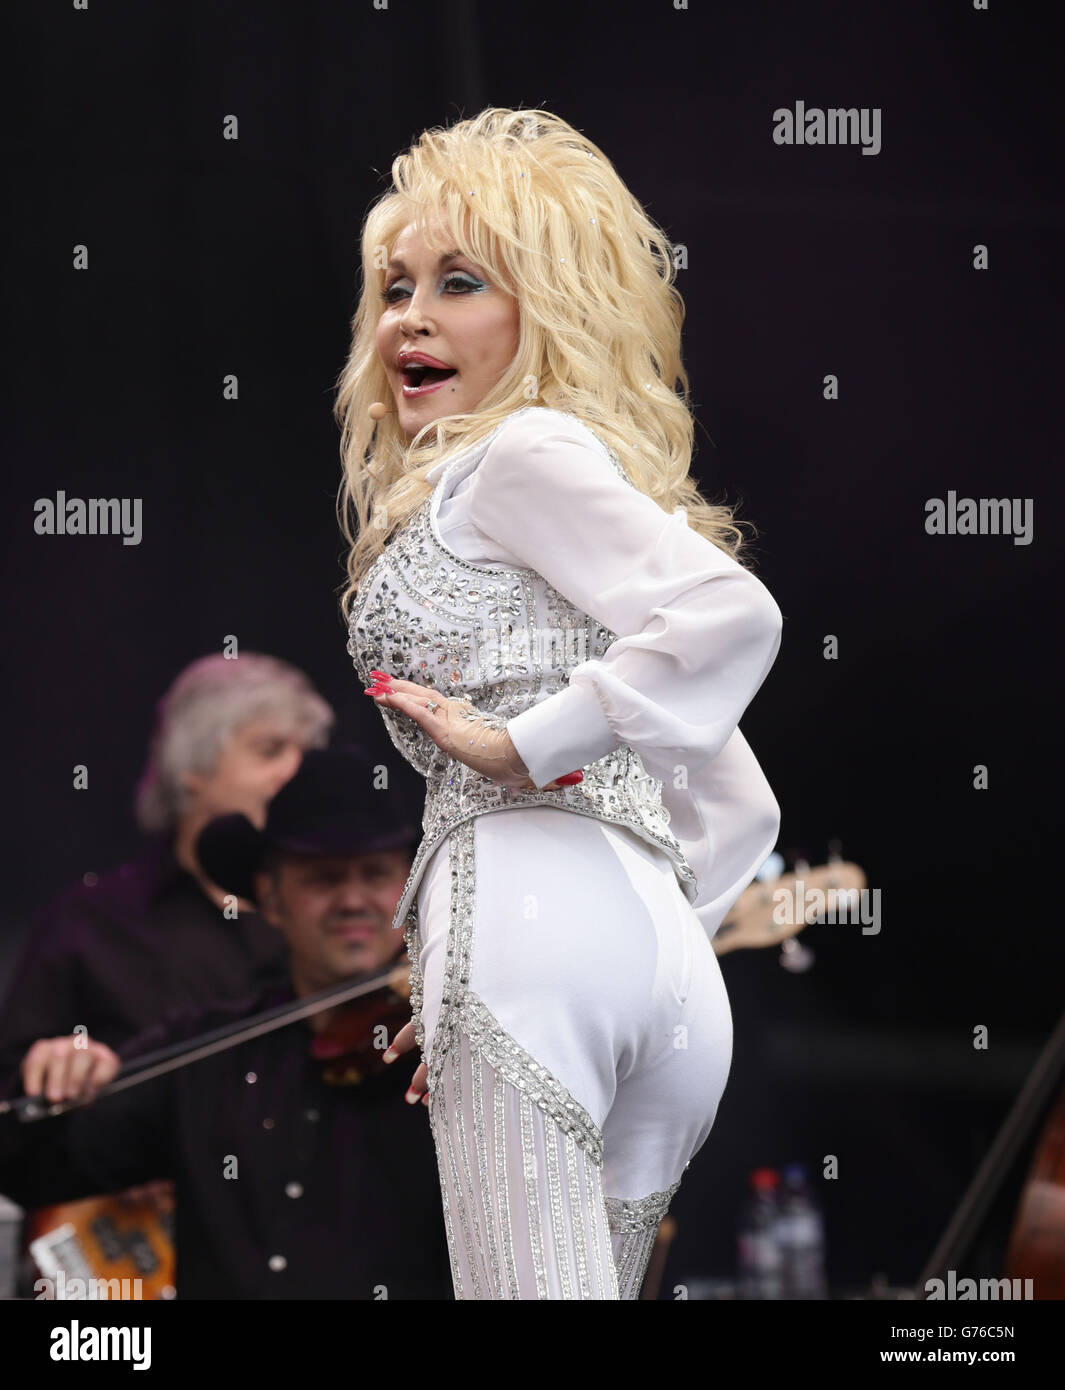 Glastonbury Festival 2014 - Day 3. Dolly Parton performing on the Pyramid Stage at the Glastonbury Festival, at Worthy Farm in Somerset. Stock Photo